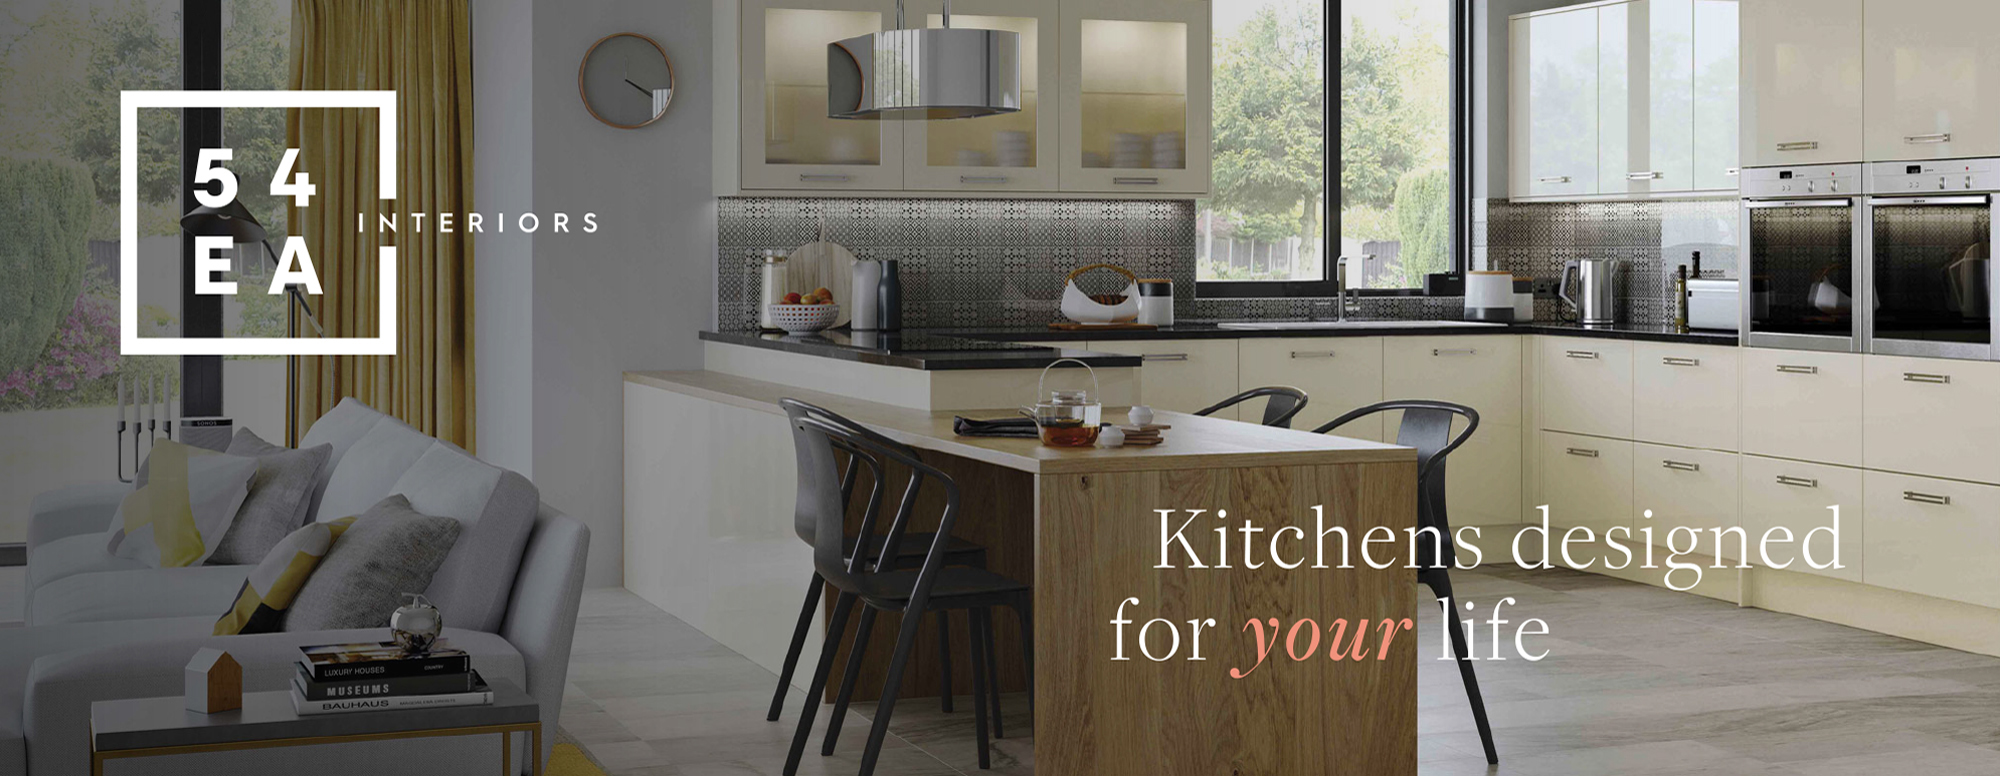 Kitchens designed for your life